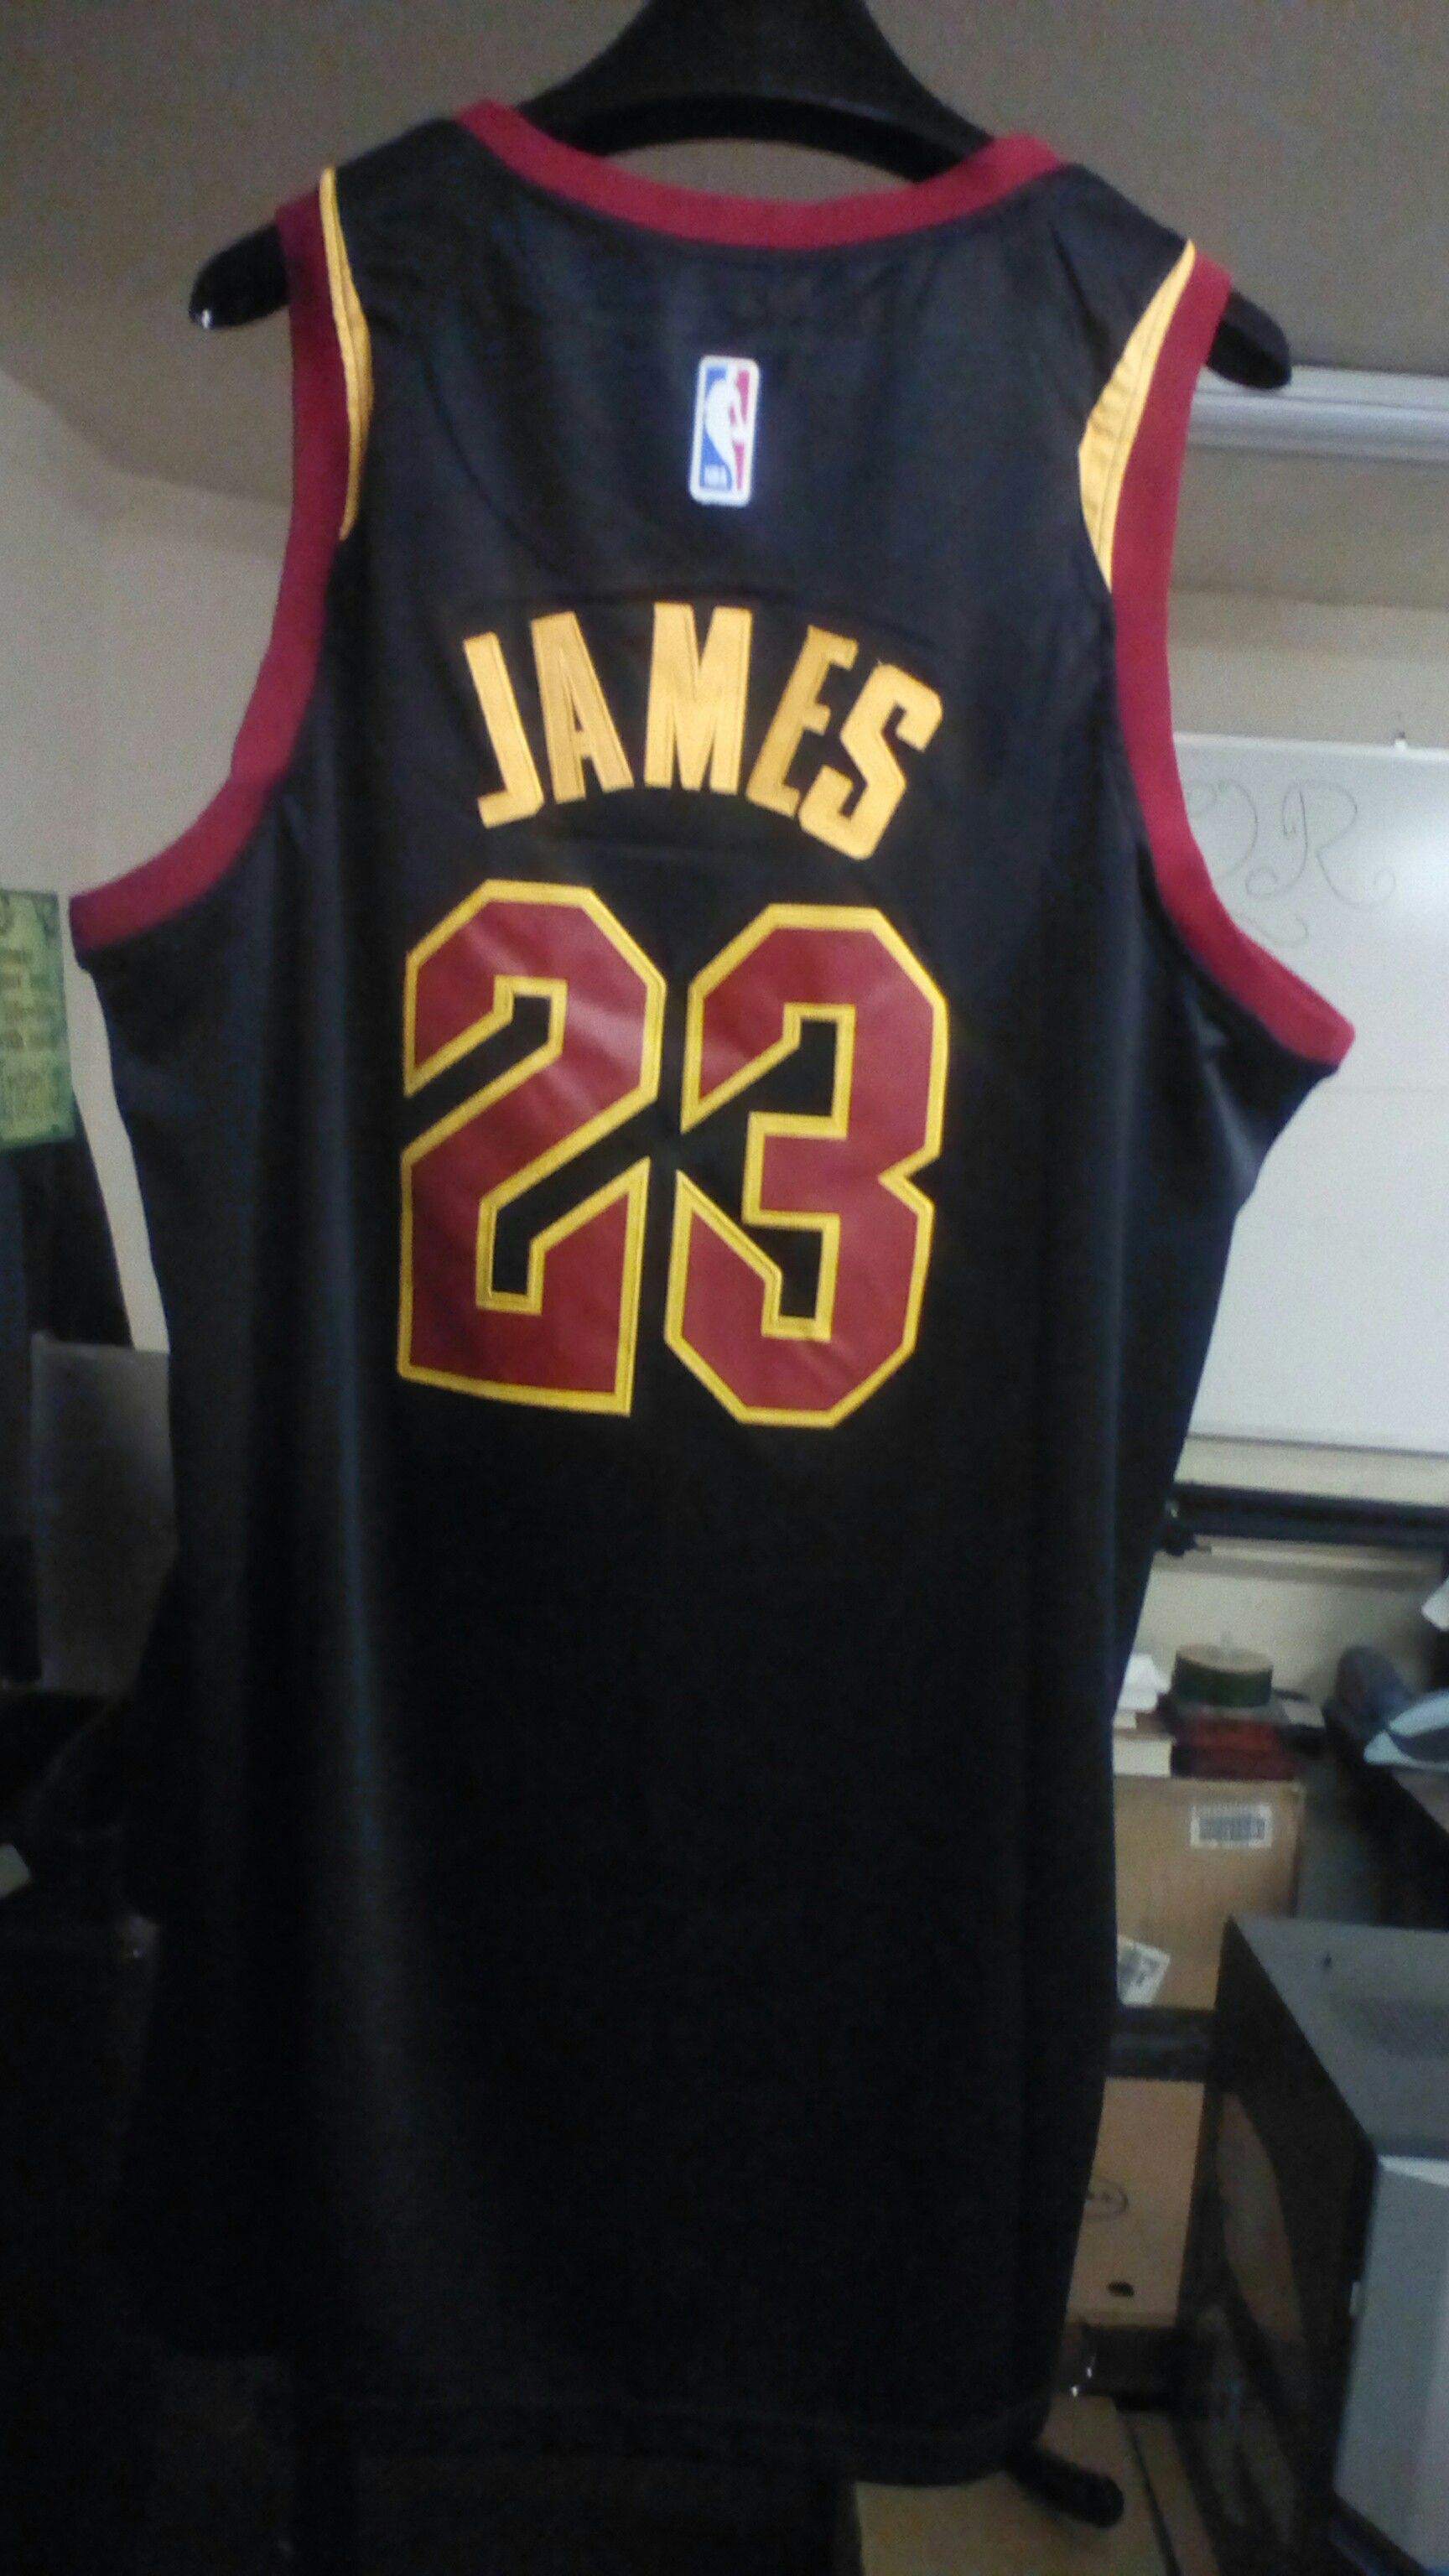 lebron james cleveland jersey authentic